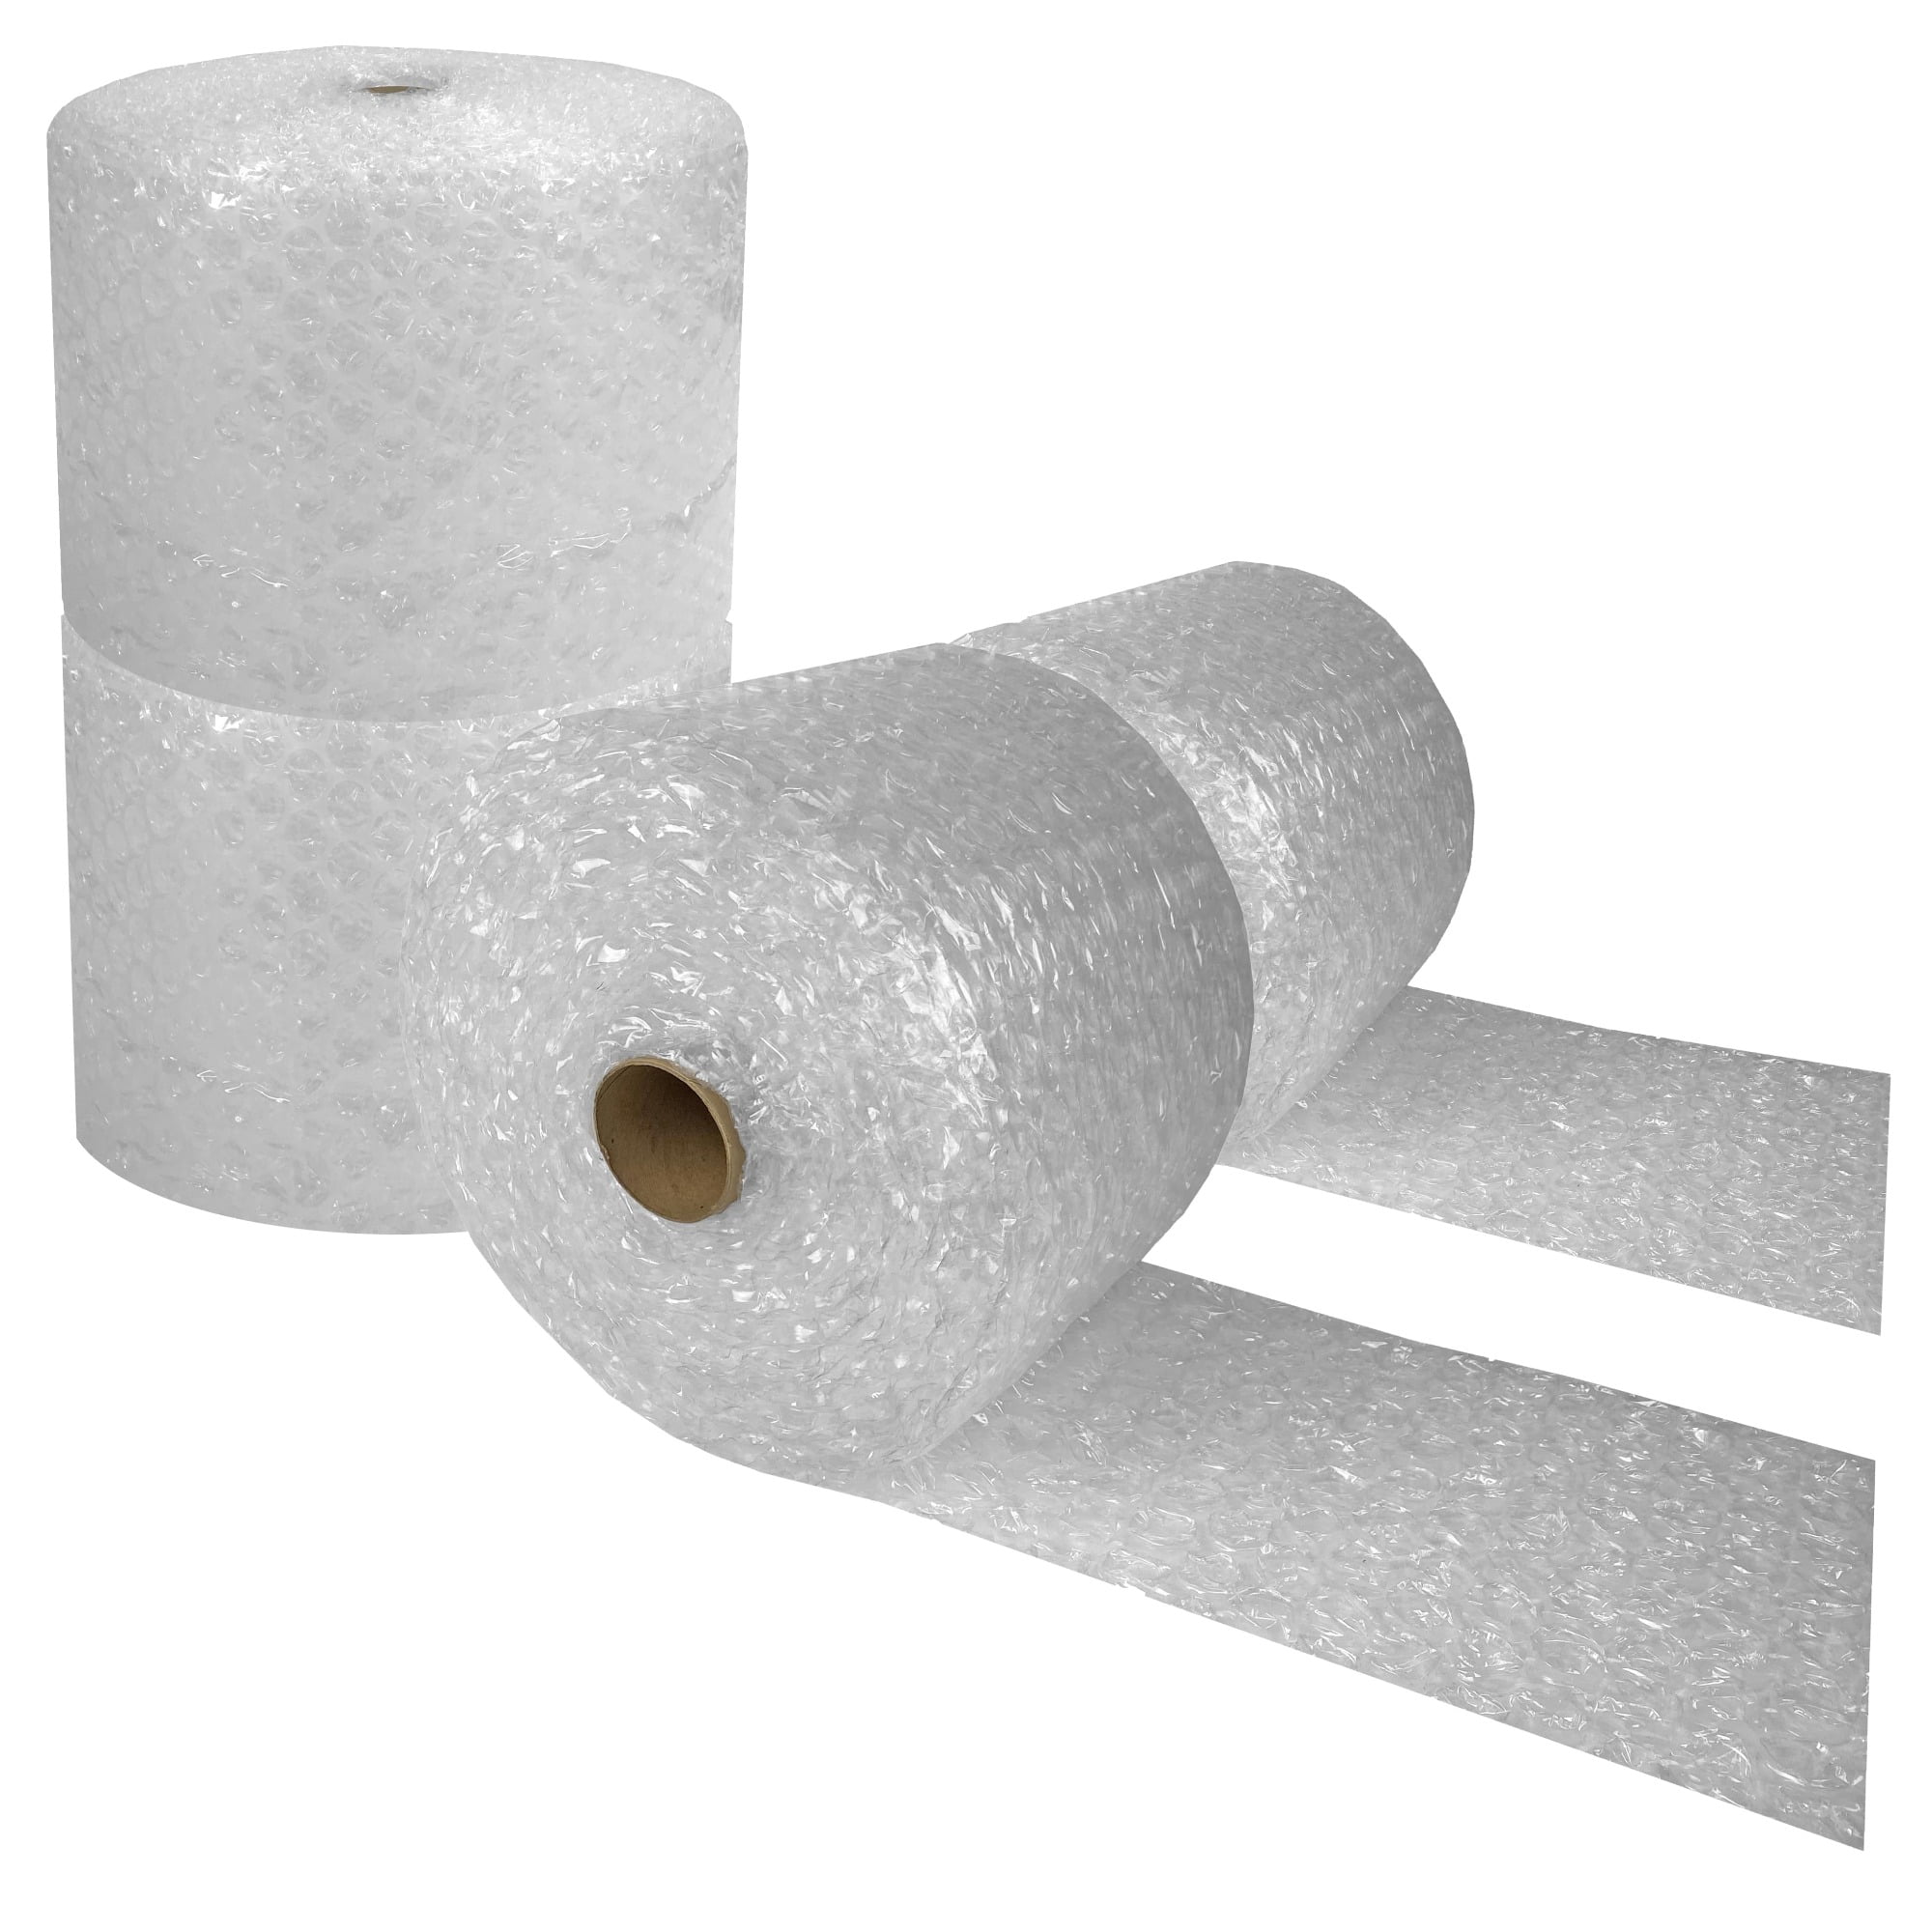 Yens Bubble 1/2"x 12" Perforated 250 ft Moving Shipping/ Protection 